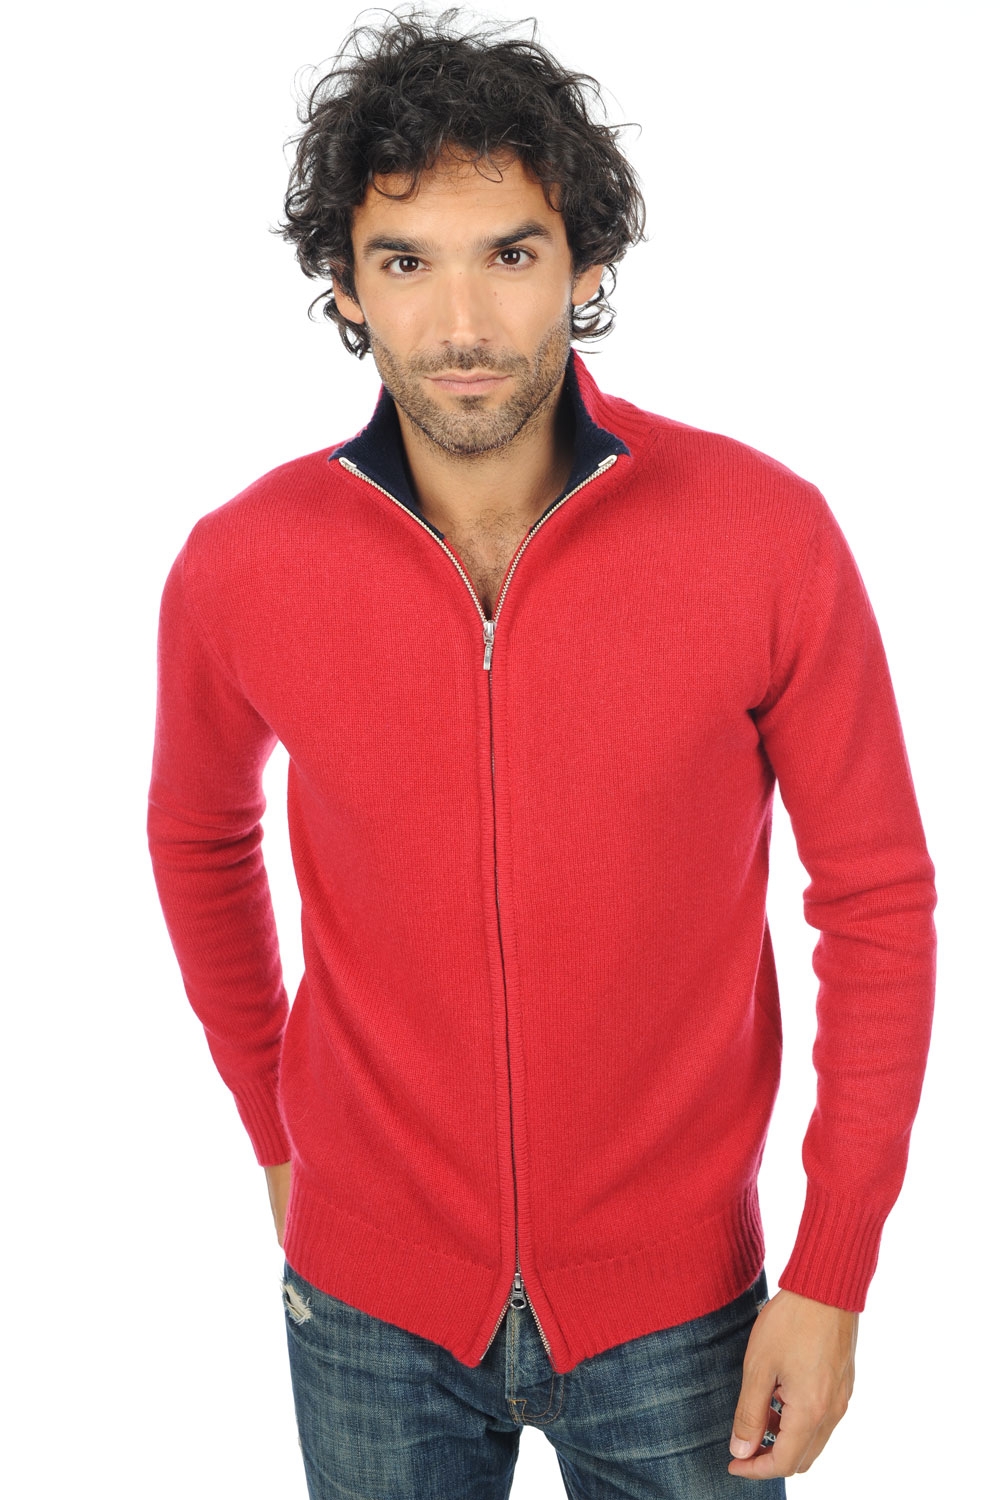 Cachemire pull homme zip capuche maxime rouge velours marine fonce xs